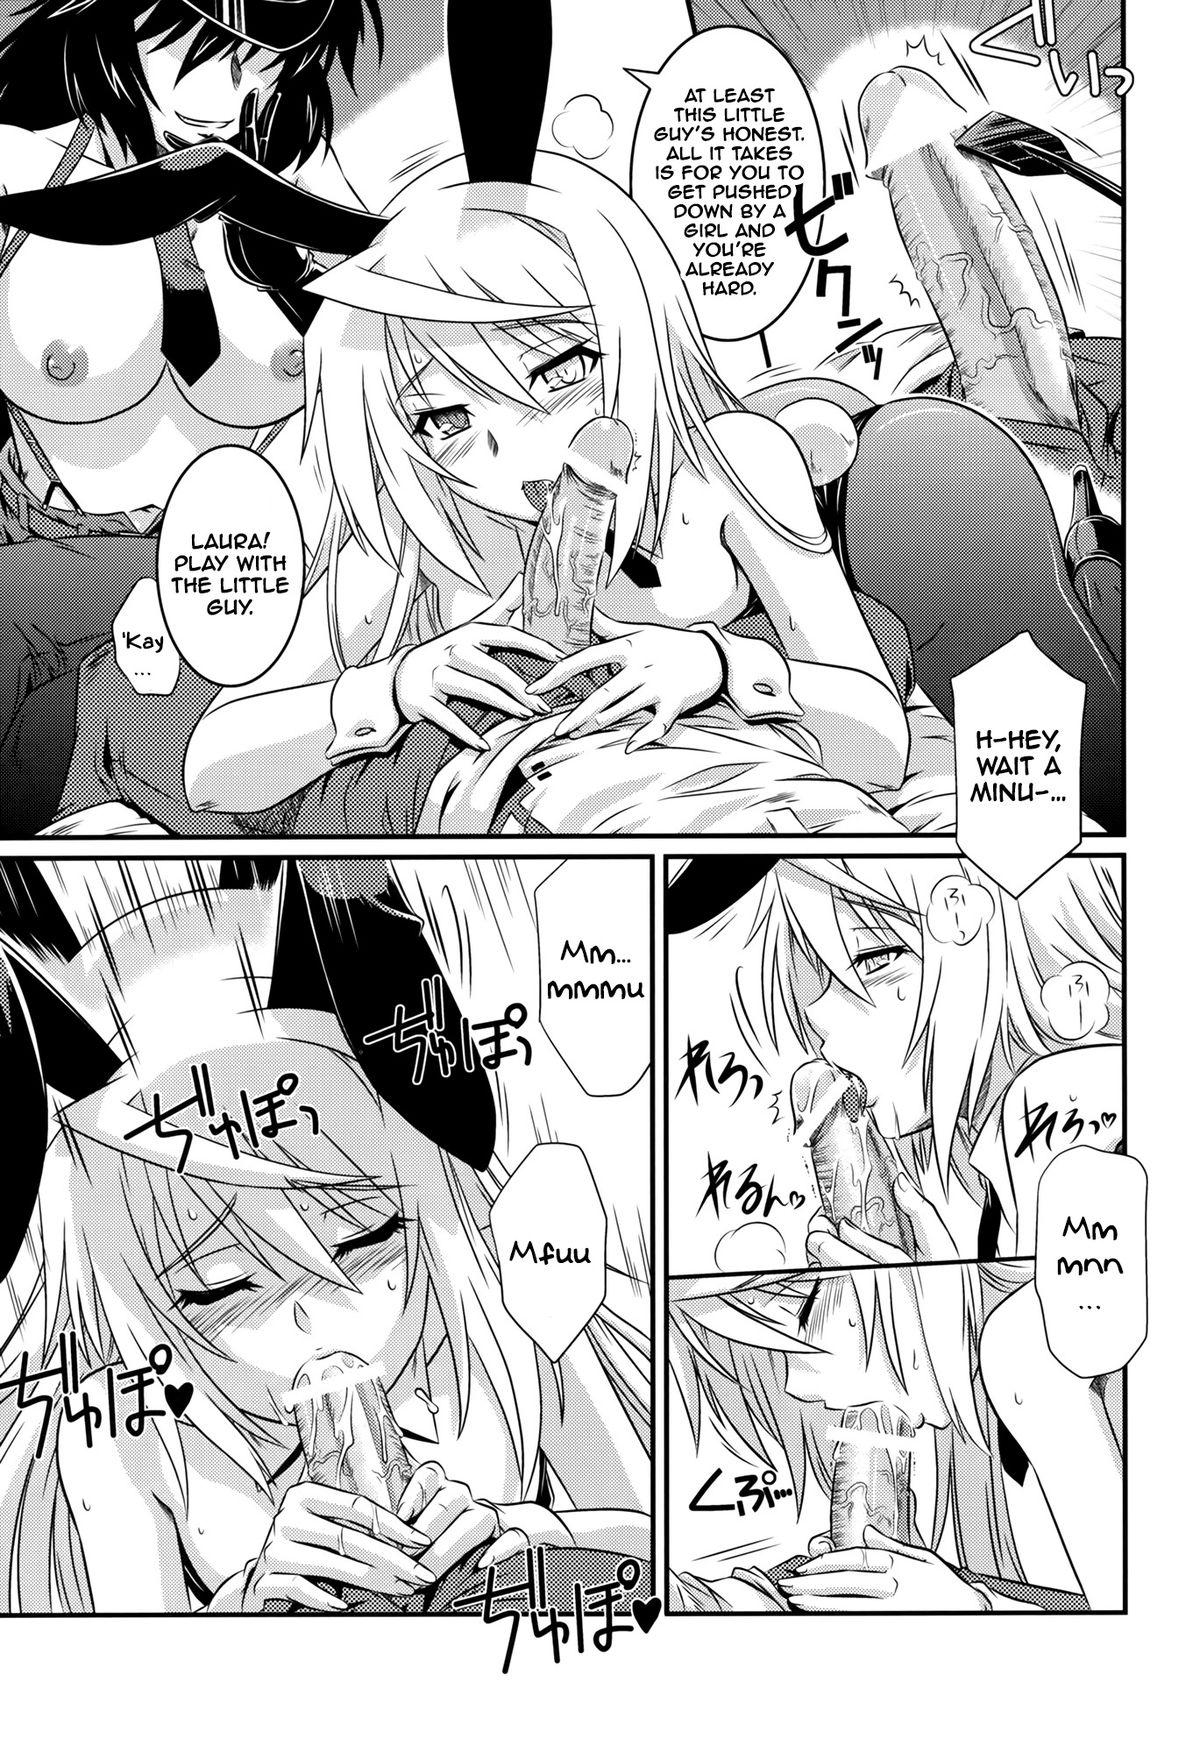 Blowjob is Incest Strategy 4 - Infinite stratos Blowjob Porn - Page 6